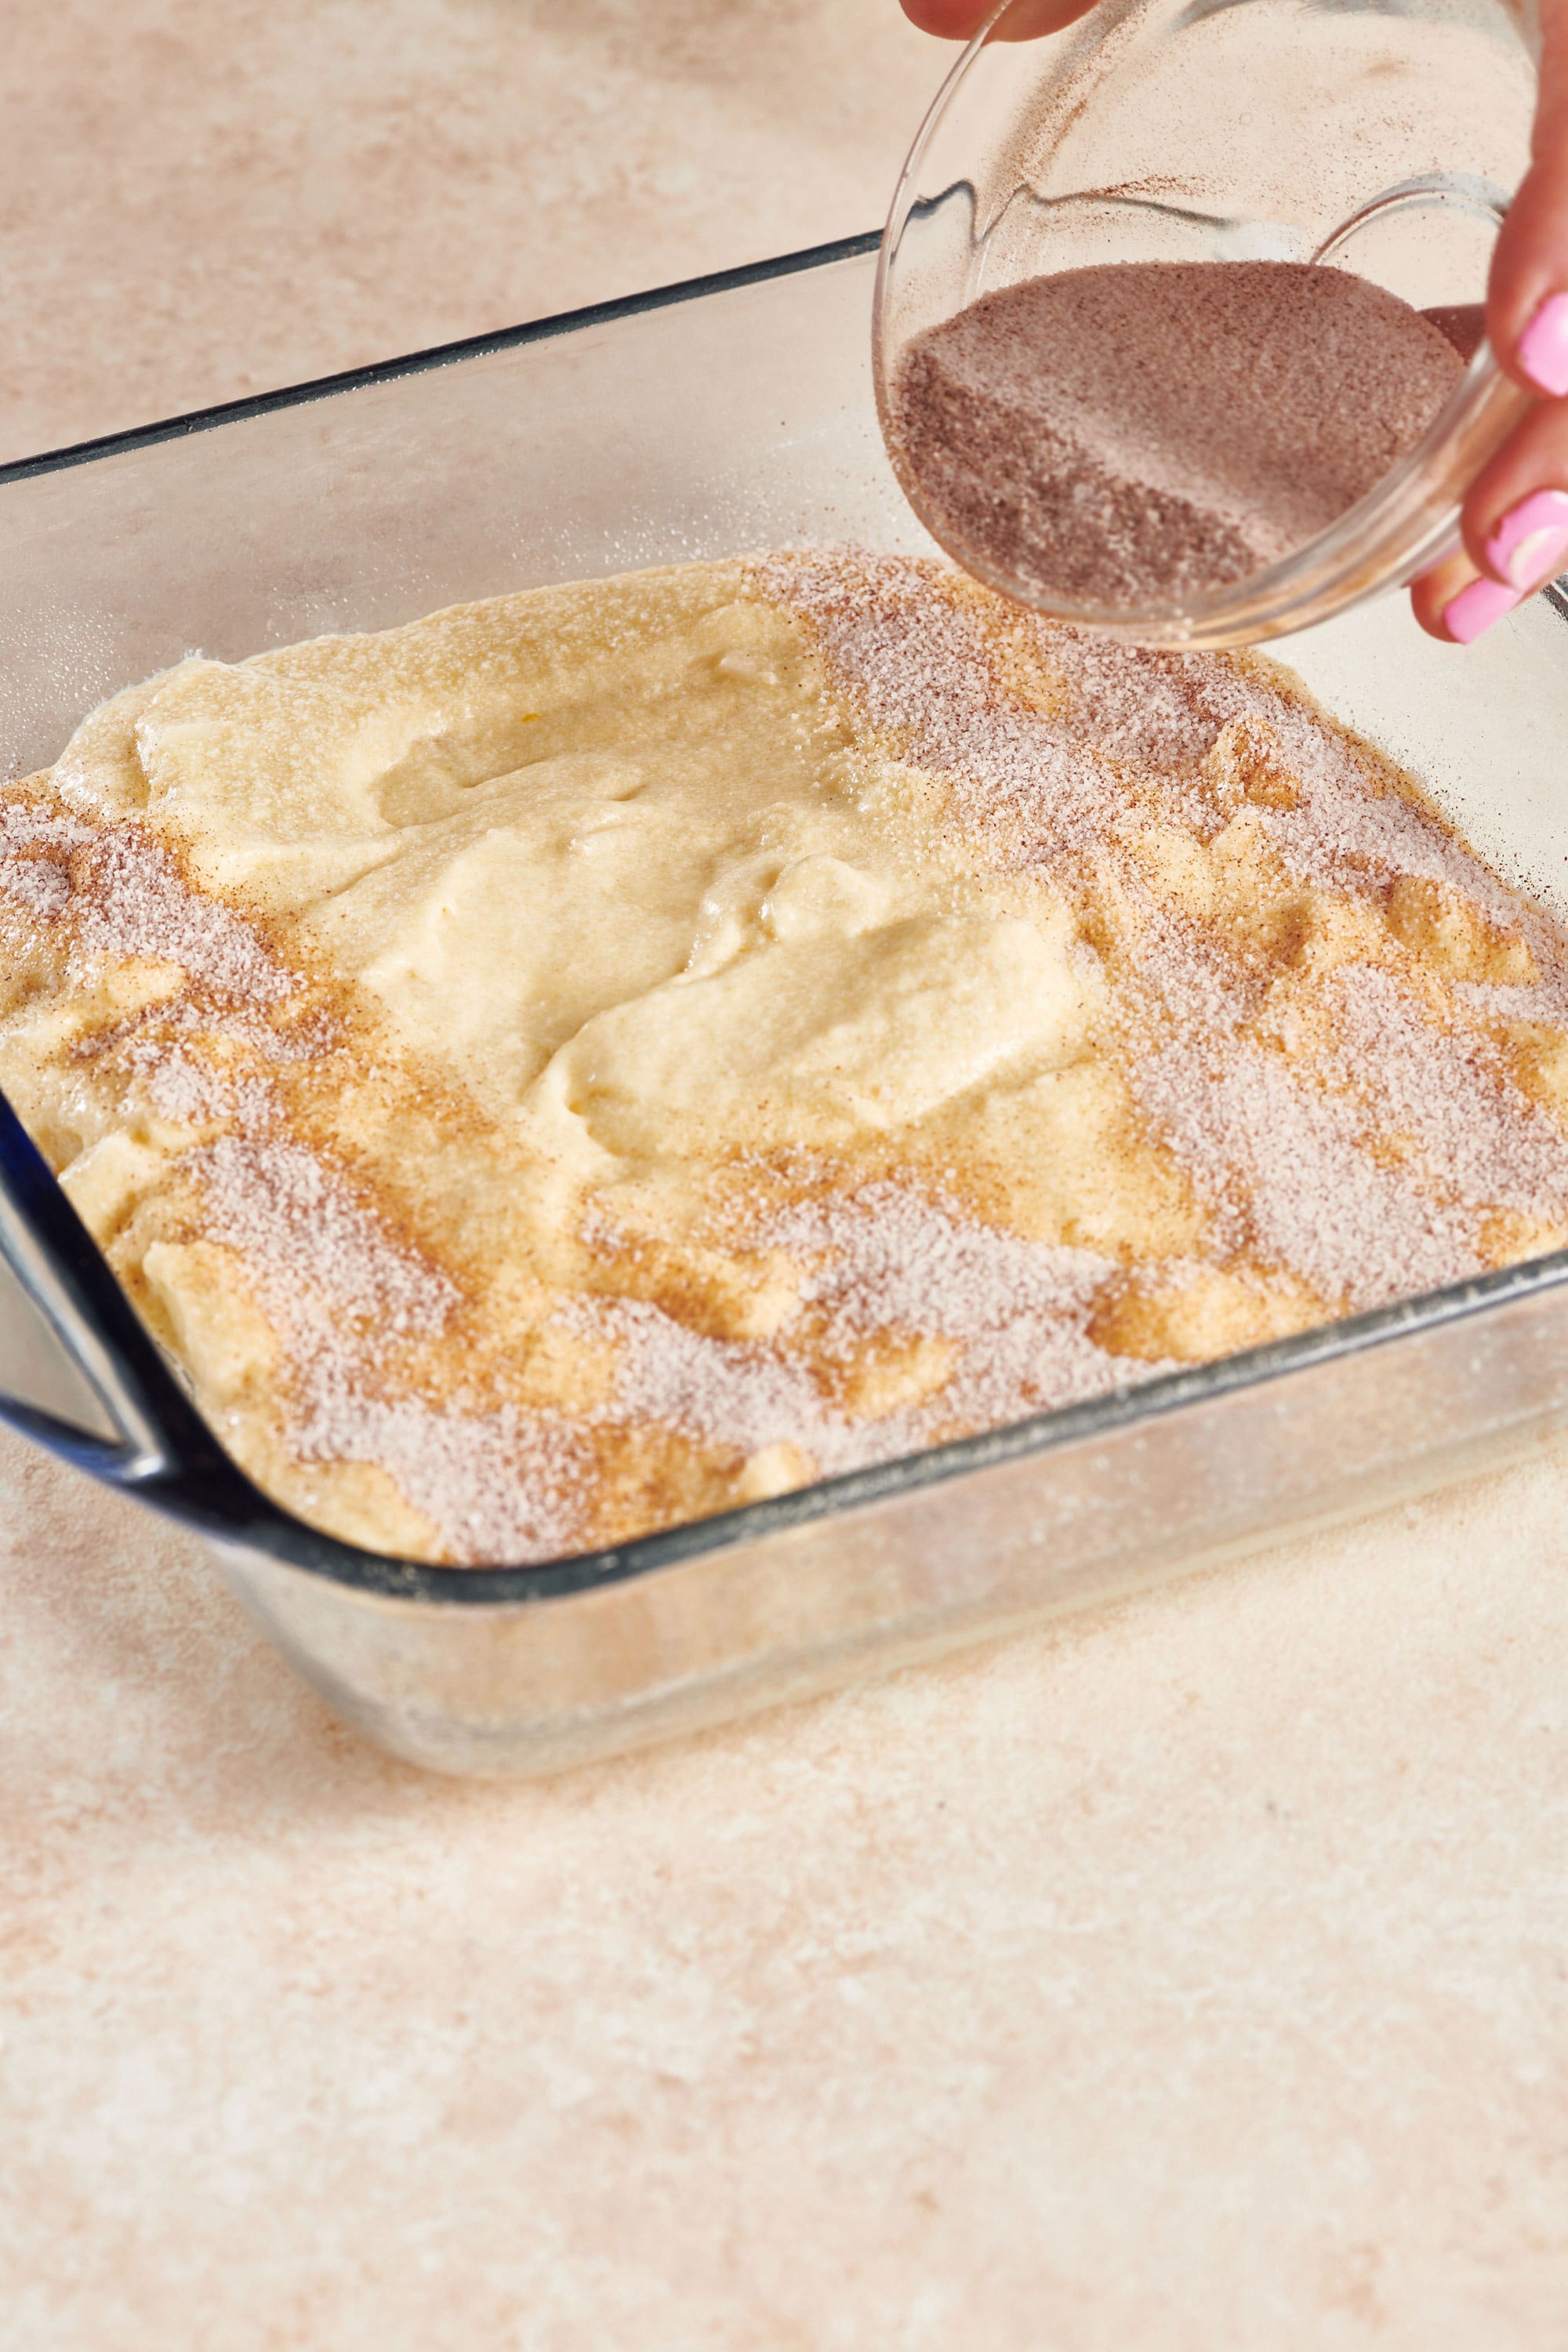 Woman sprinkling a sugar mixture onto an unbaked Apple Coffee Cake.